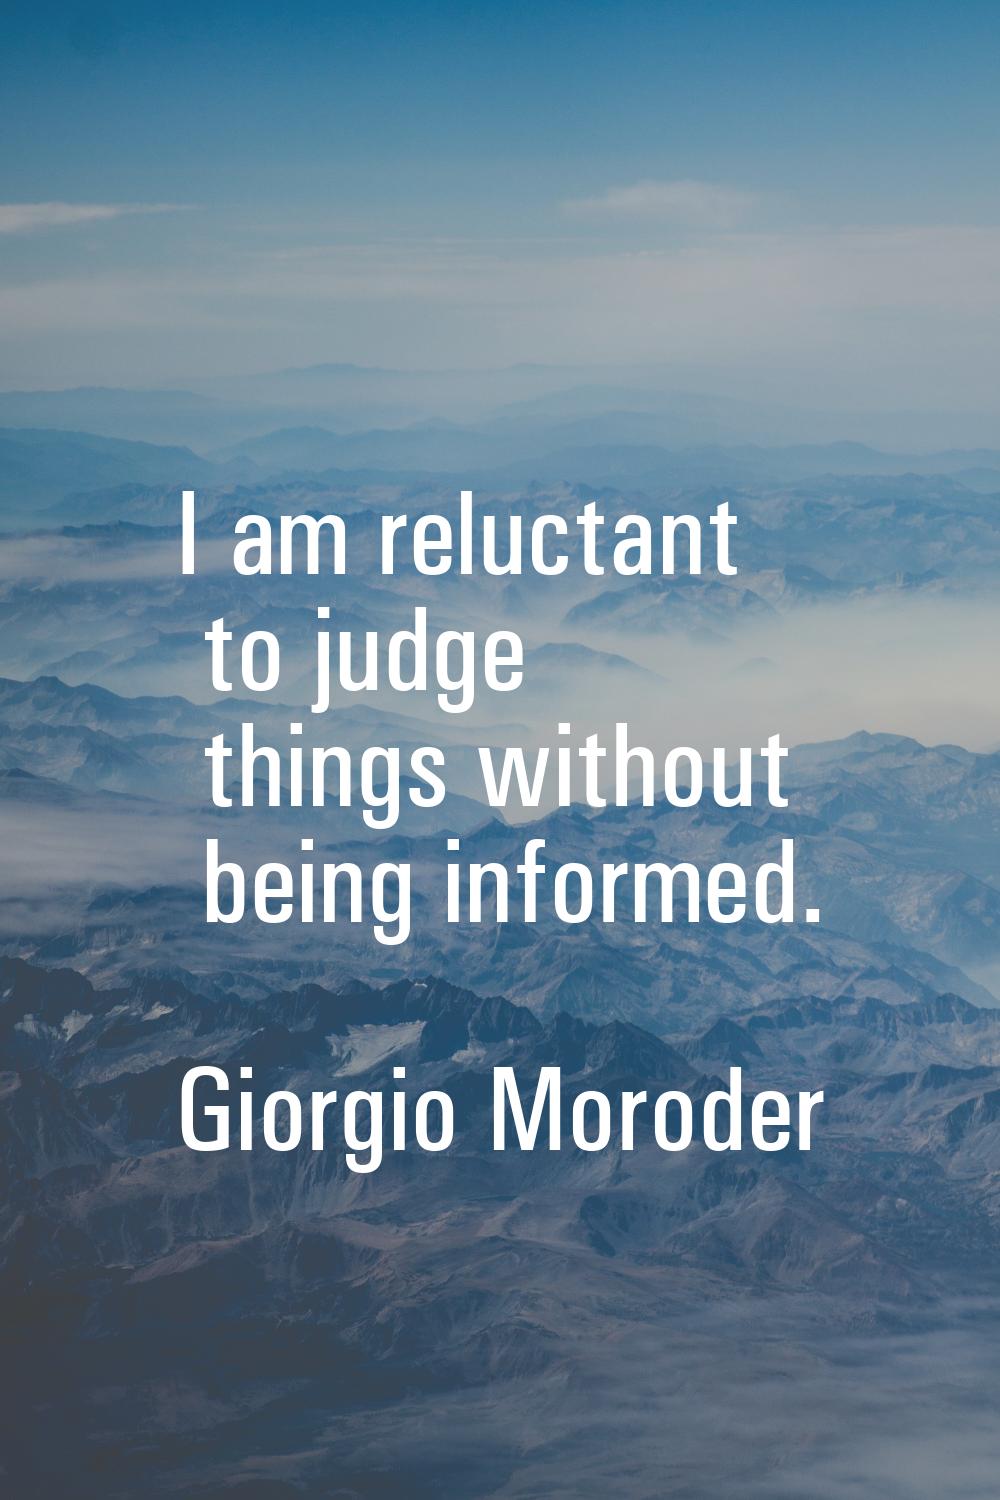 I am reluctant to judge things without being informed.